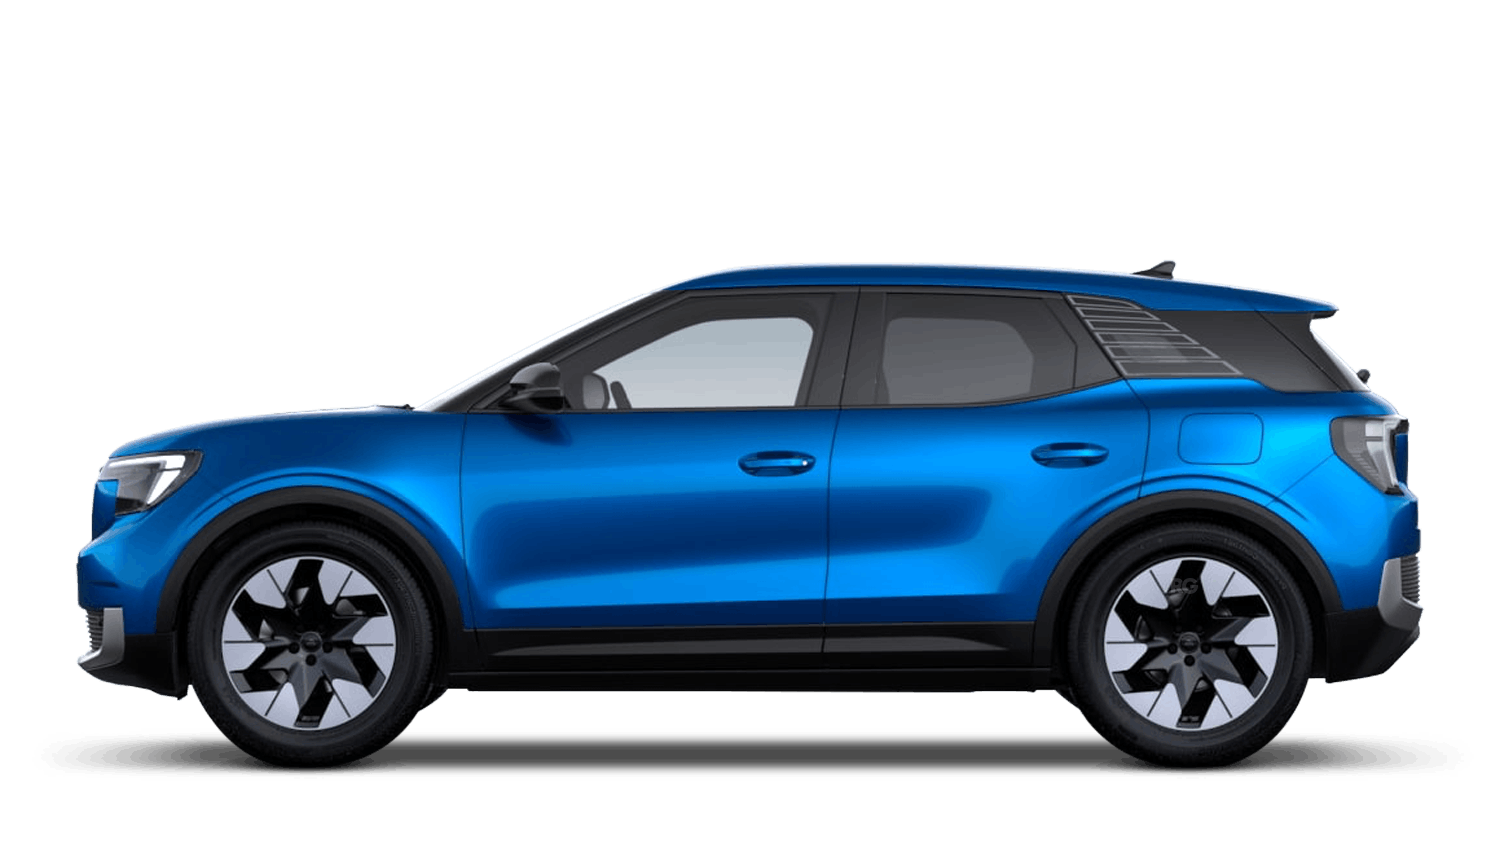 Ford Explorer PREMIUM 77kWh Extended Range Electric Offer